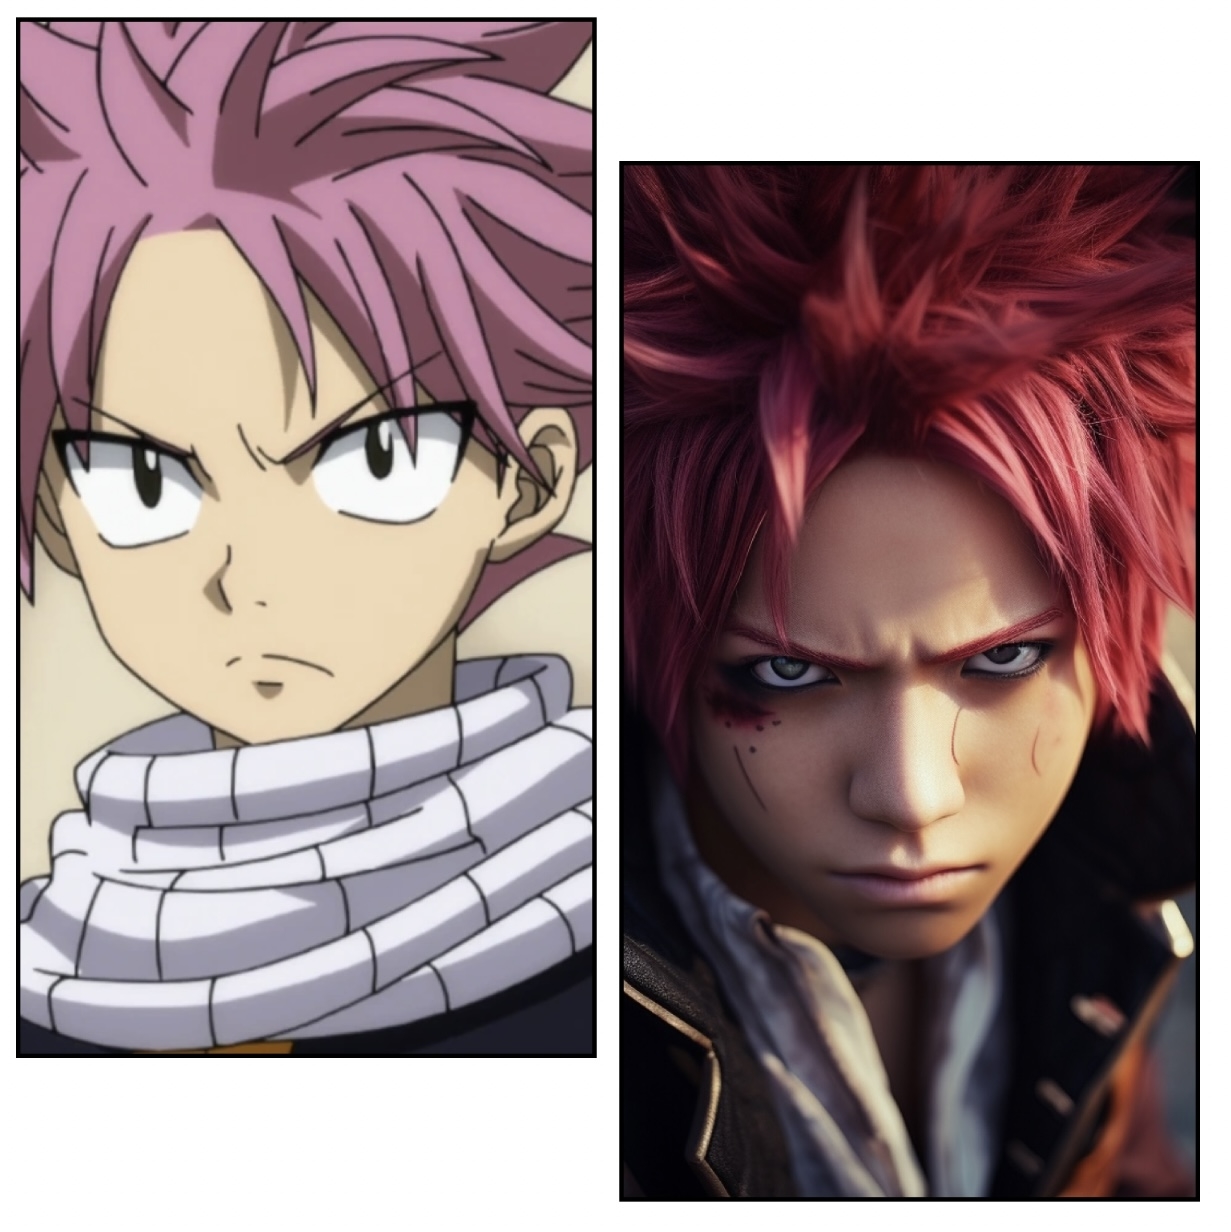 A scowling boy with pink hair.